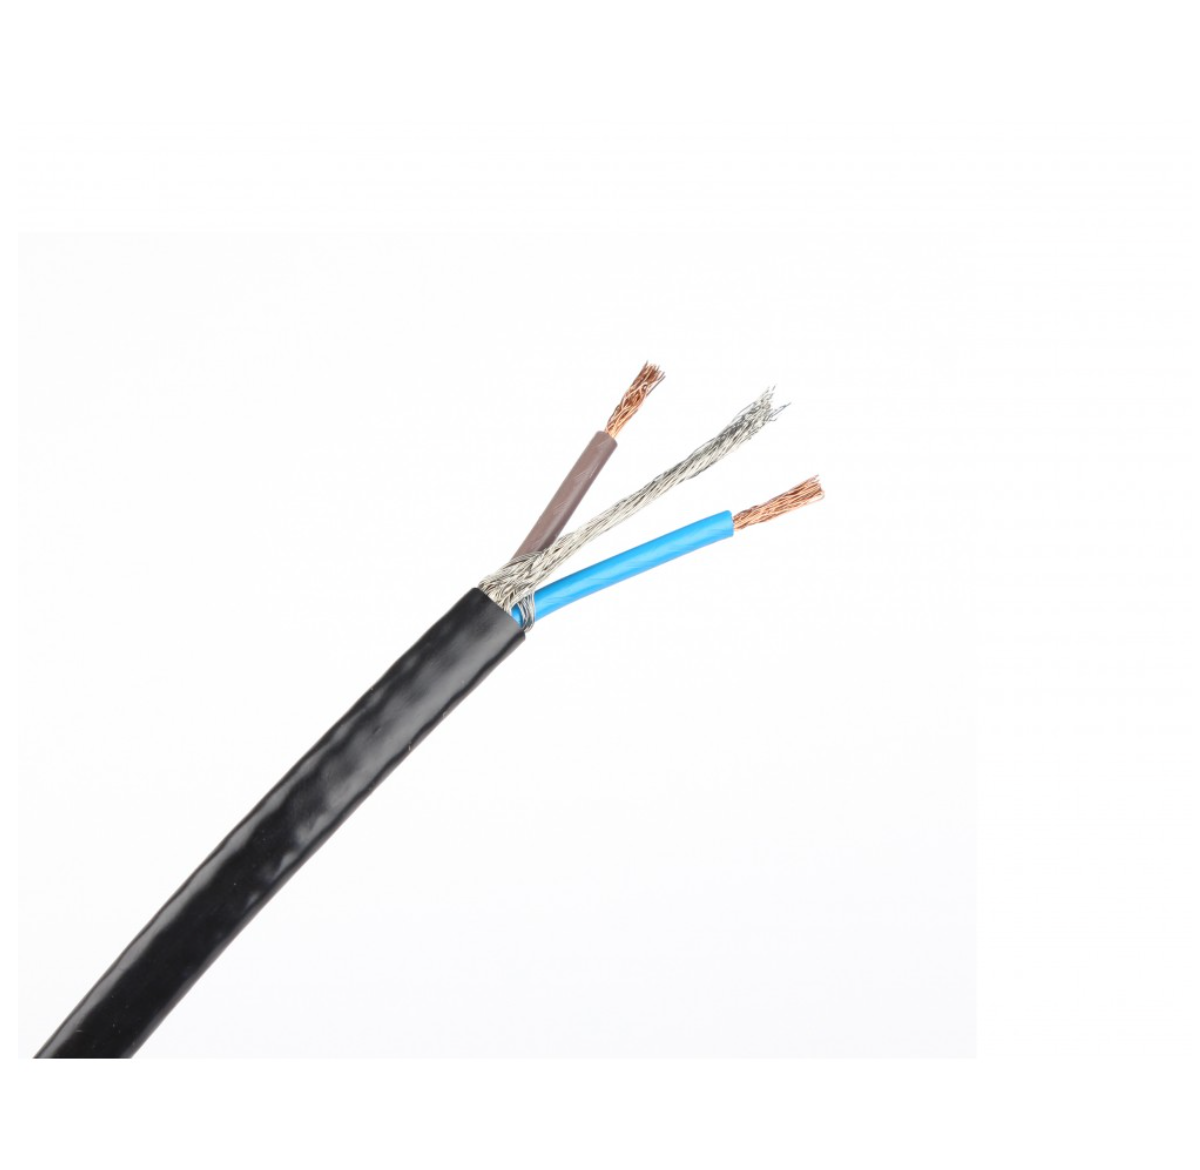 Heating cable - 90m